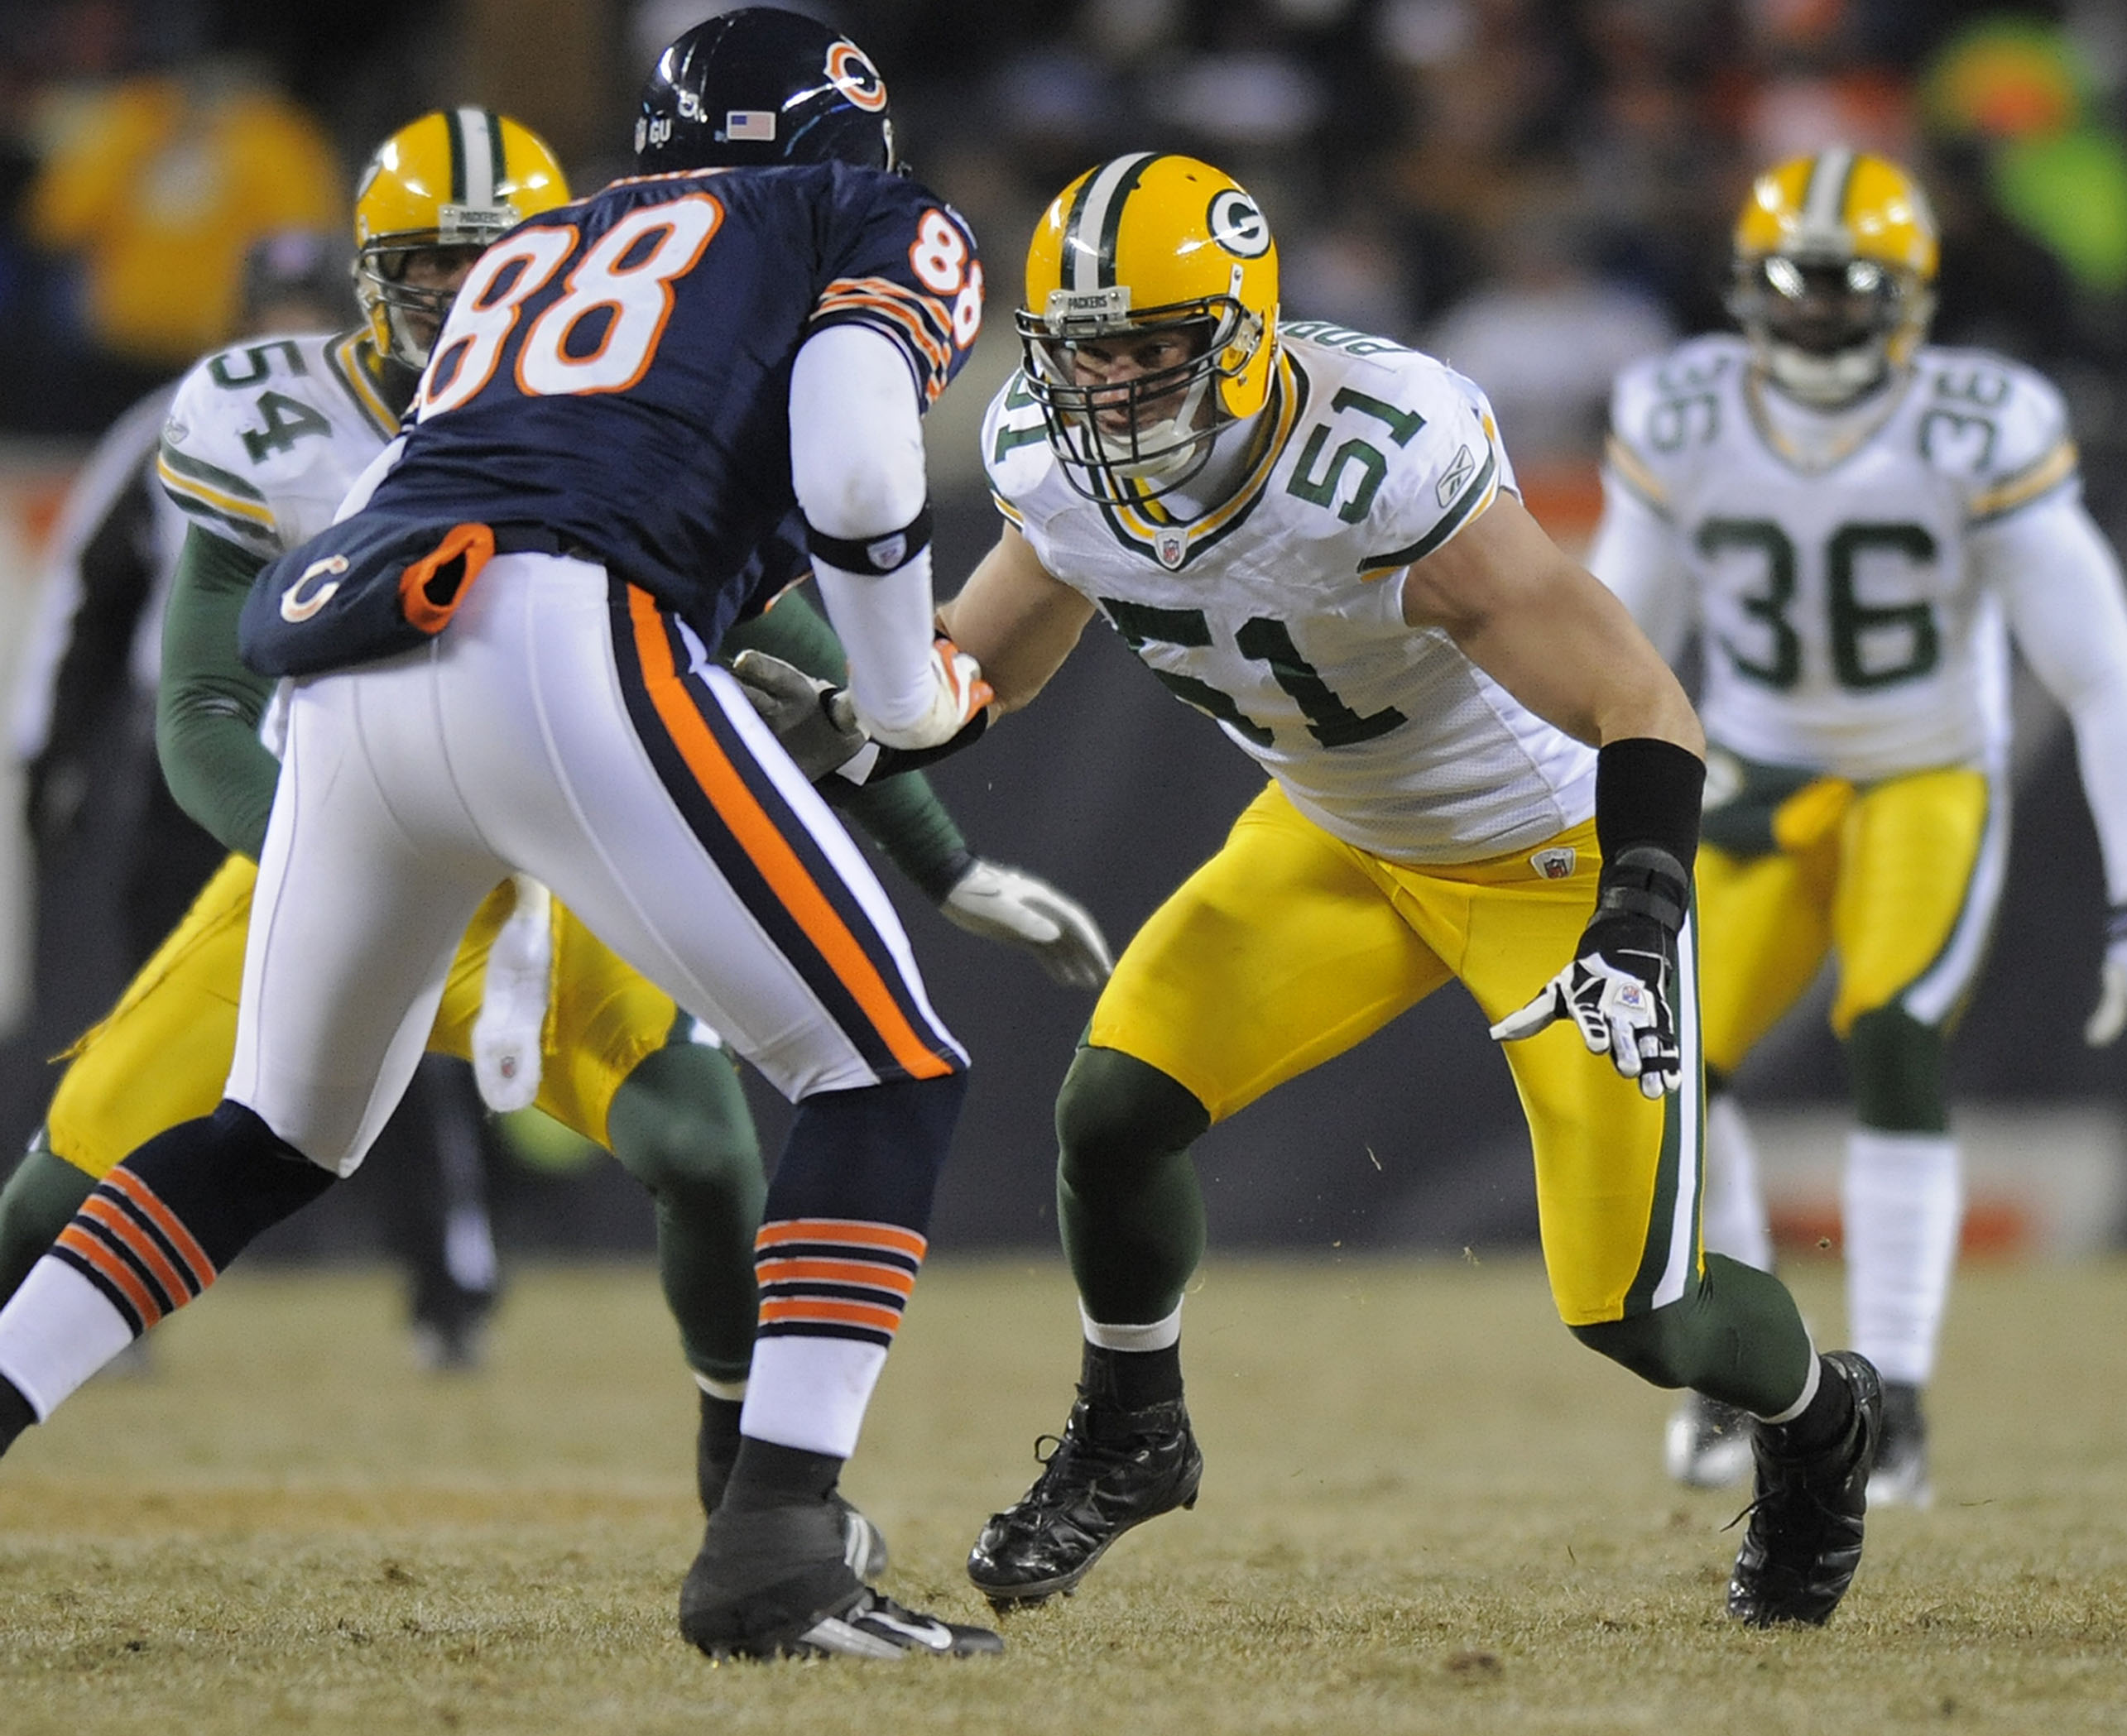 BRADY POPPINGA, Of The Green Bay Packers , In Action  During The Packers  Game Against The Chicago Bears On December 21, 2008 In Chicago, IL...Bears Win 20-17